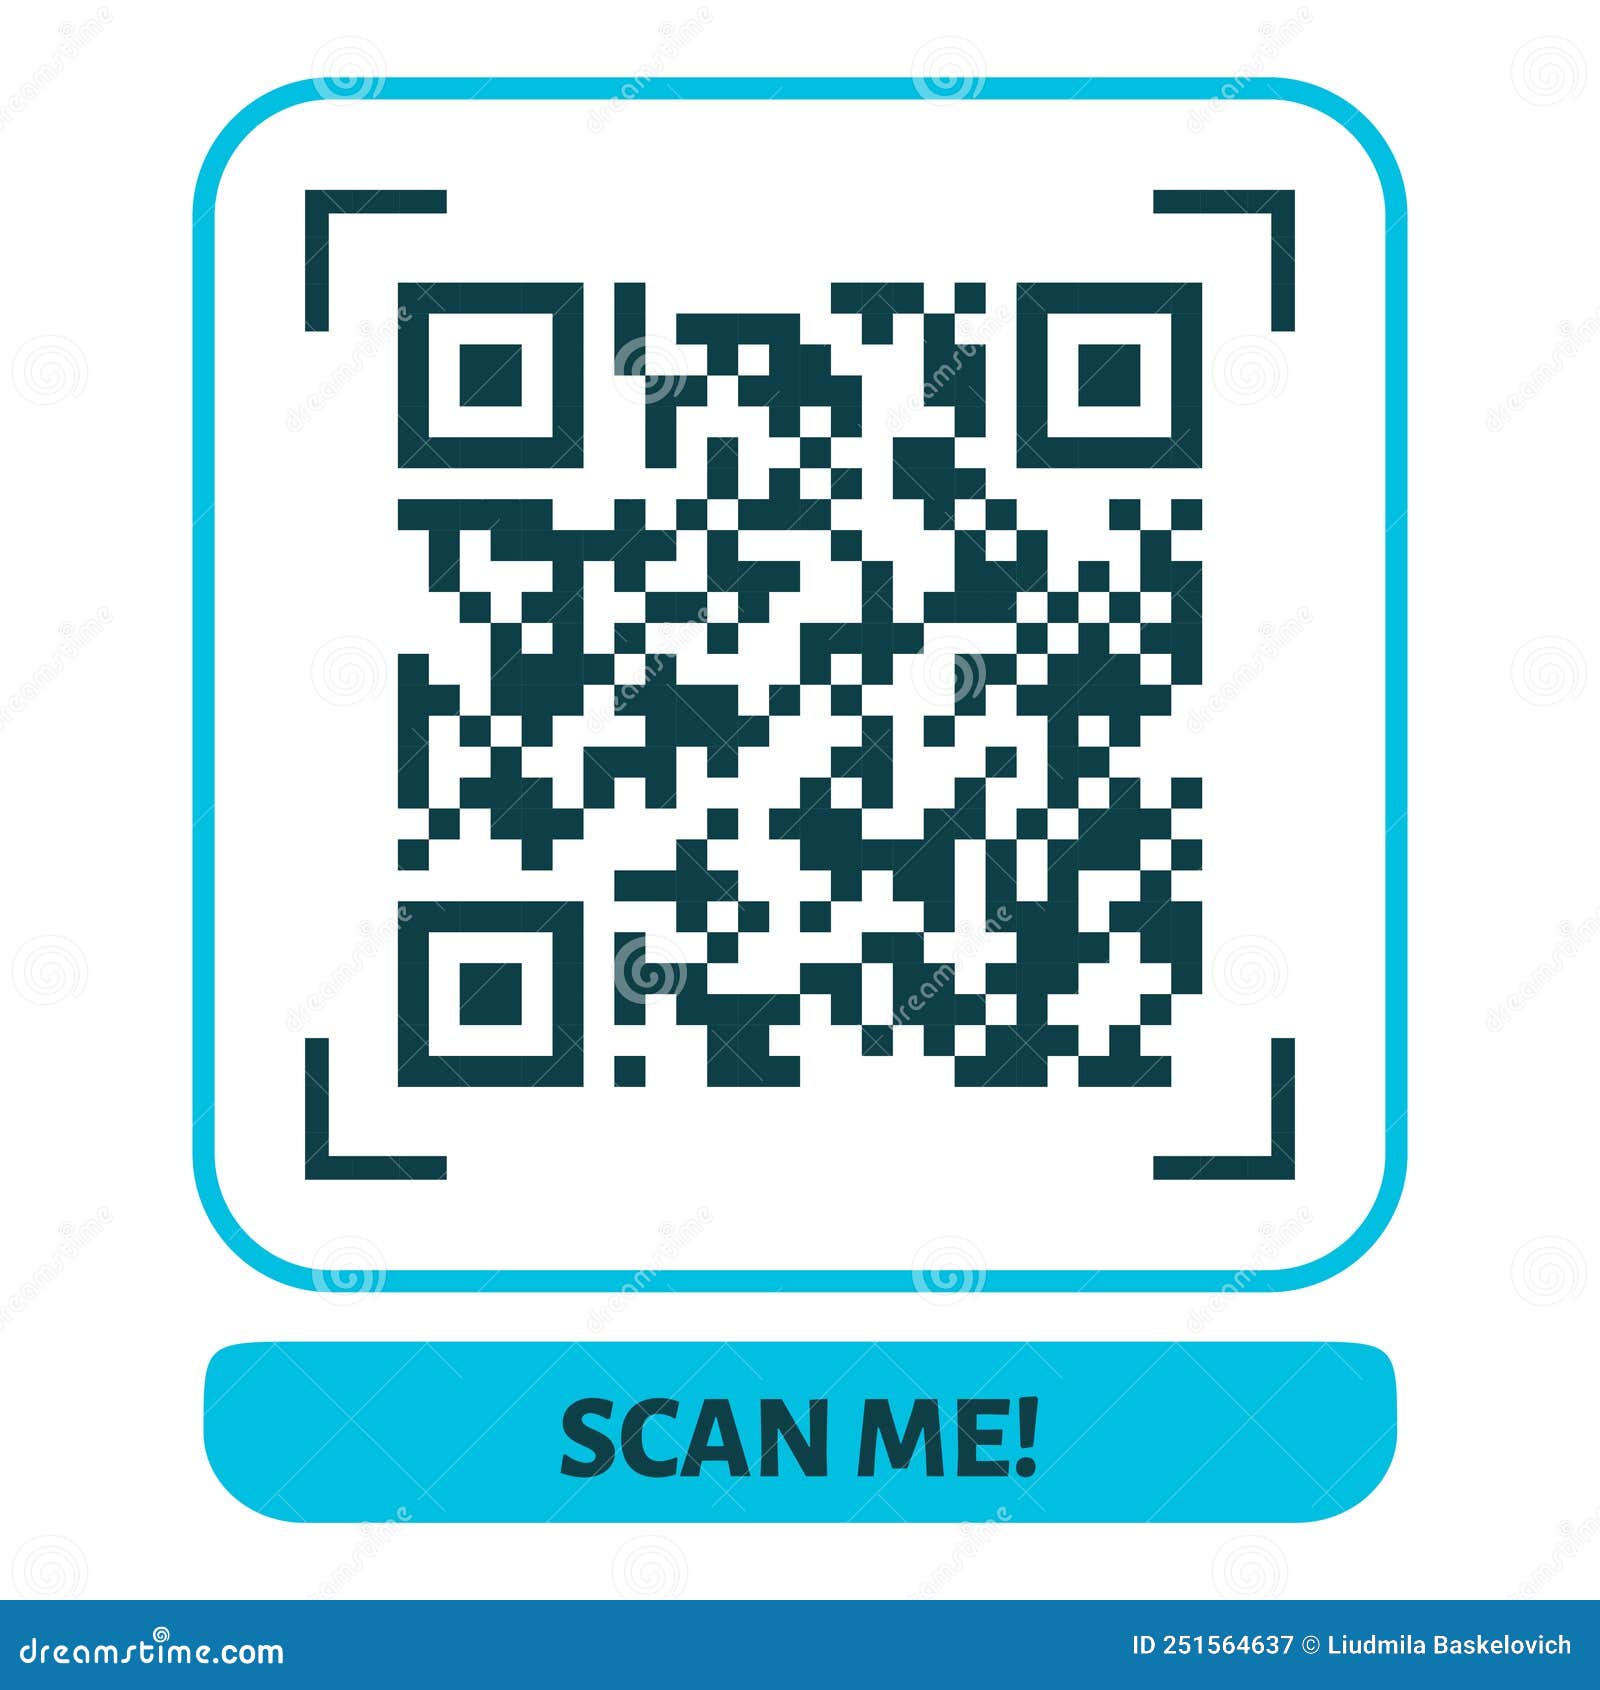 Scan Me Qr Code Design. Qr Code For Payment, Text Transfer With Scan Me  Button Stock Vector - Illustration Of Camera, Template: 251564637